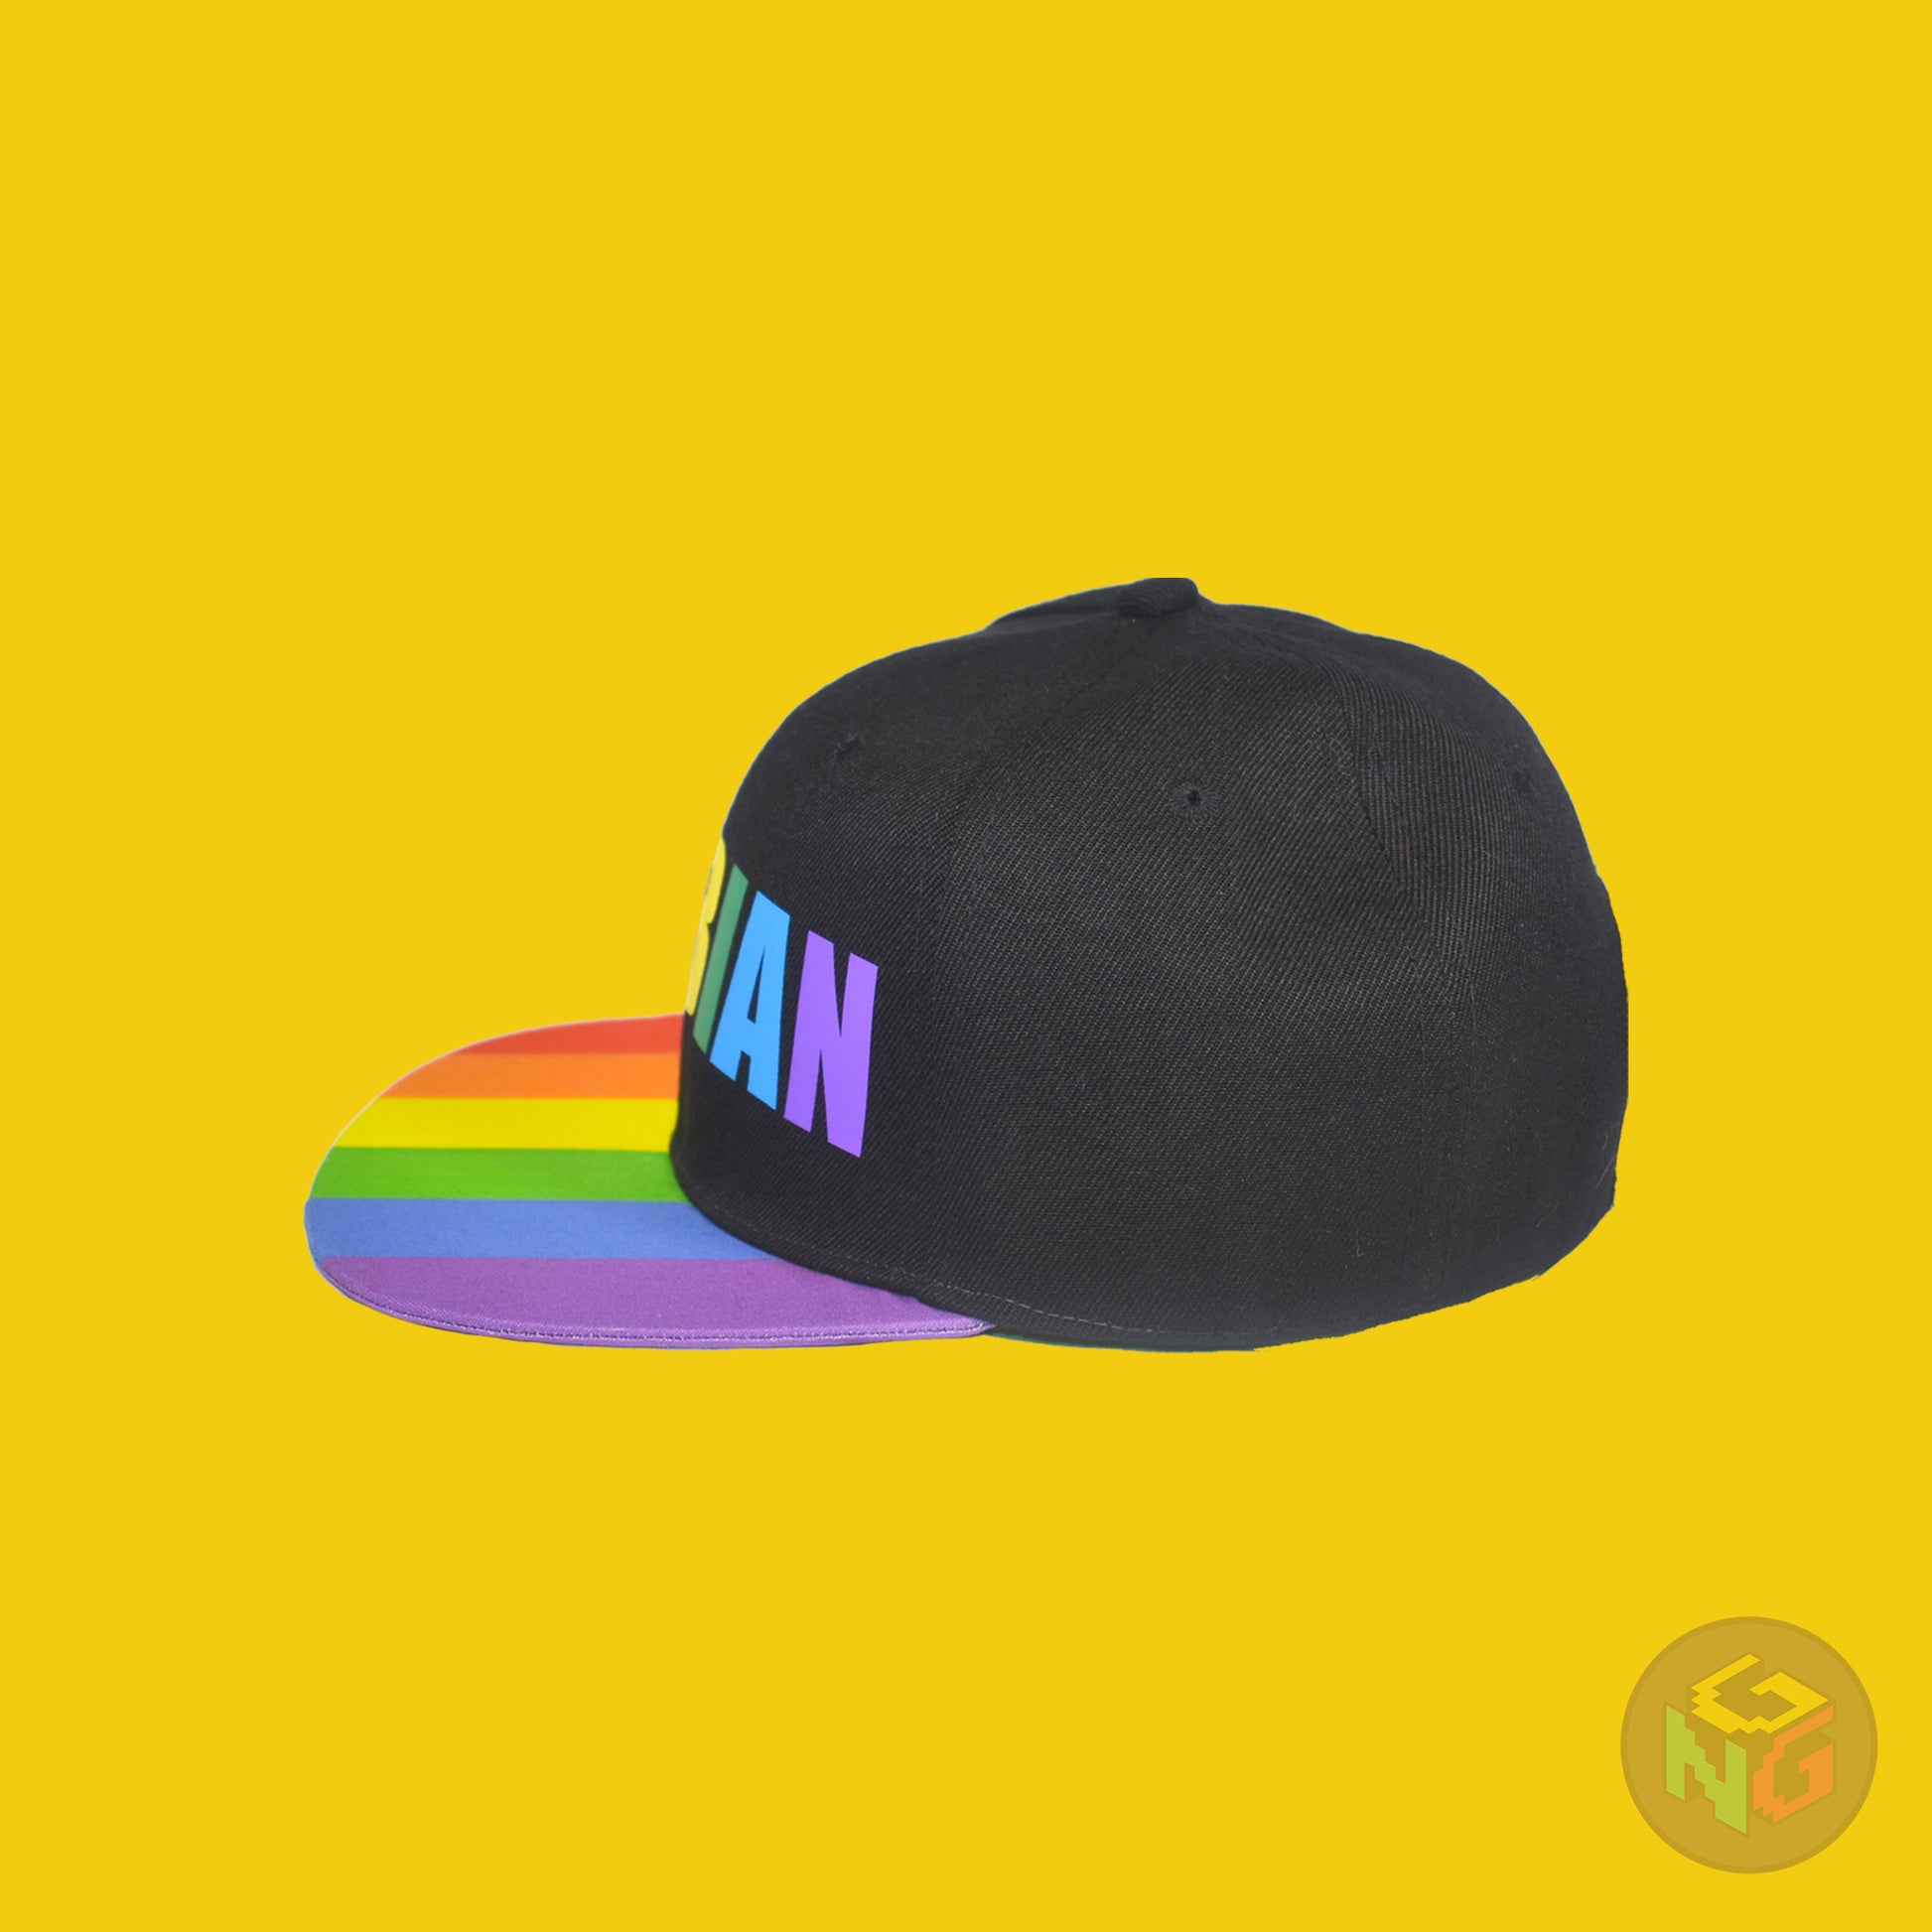 Black flat bill snapback hat. The brim has the rainbow pride flag on both sides and the front of the hat has the word “LESBIAN” in rainbow letters. Left view